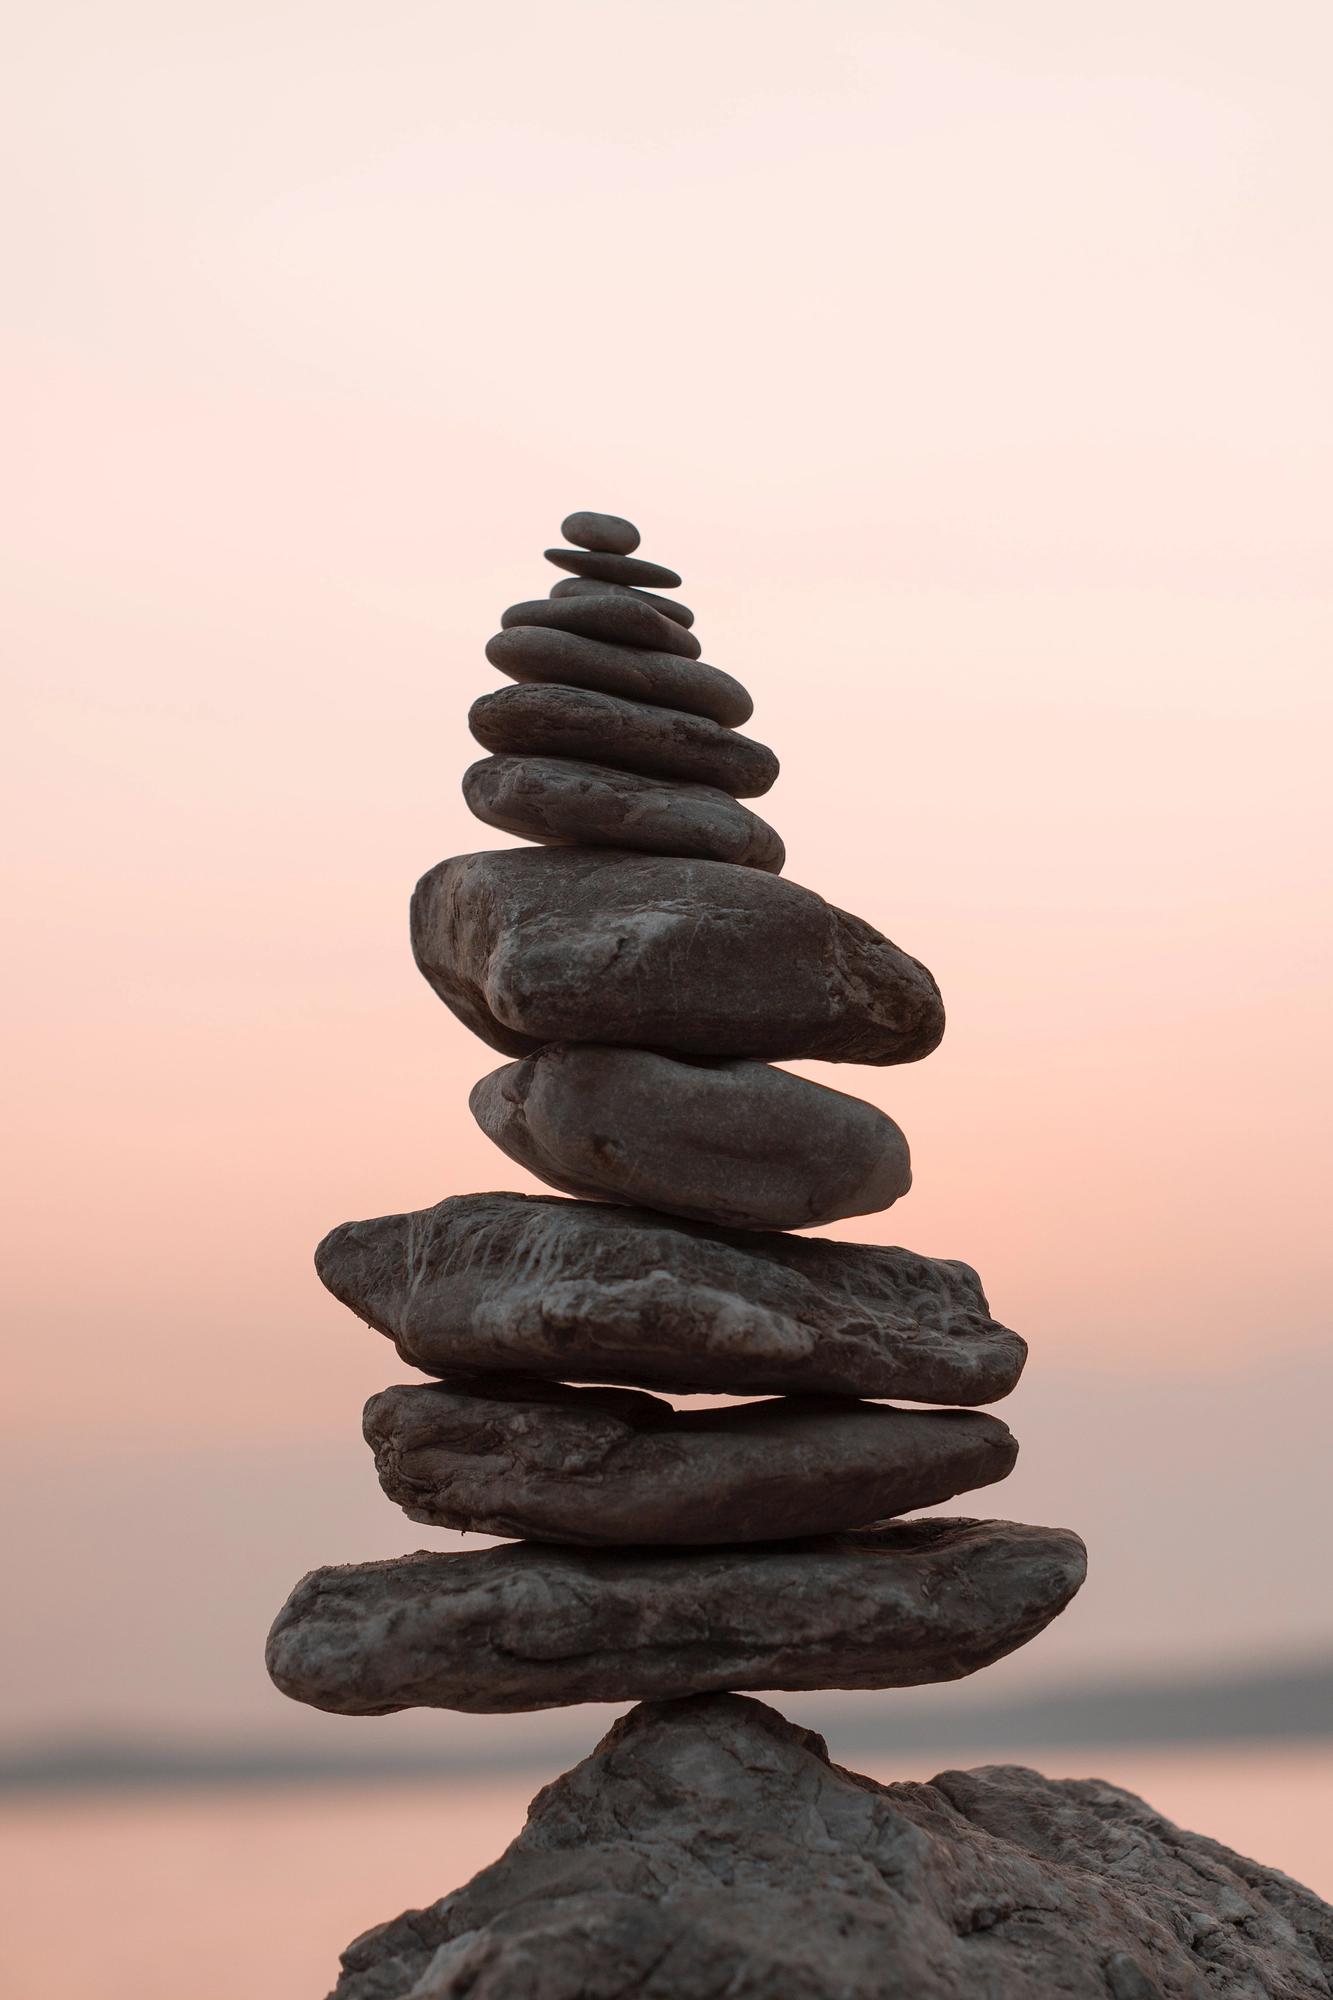 How To Find Balance In Everyday Life